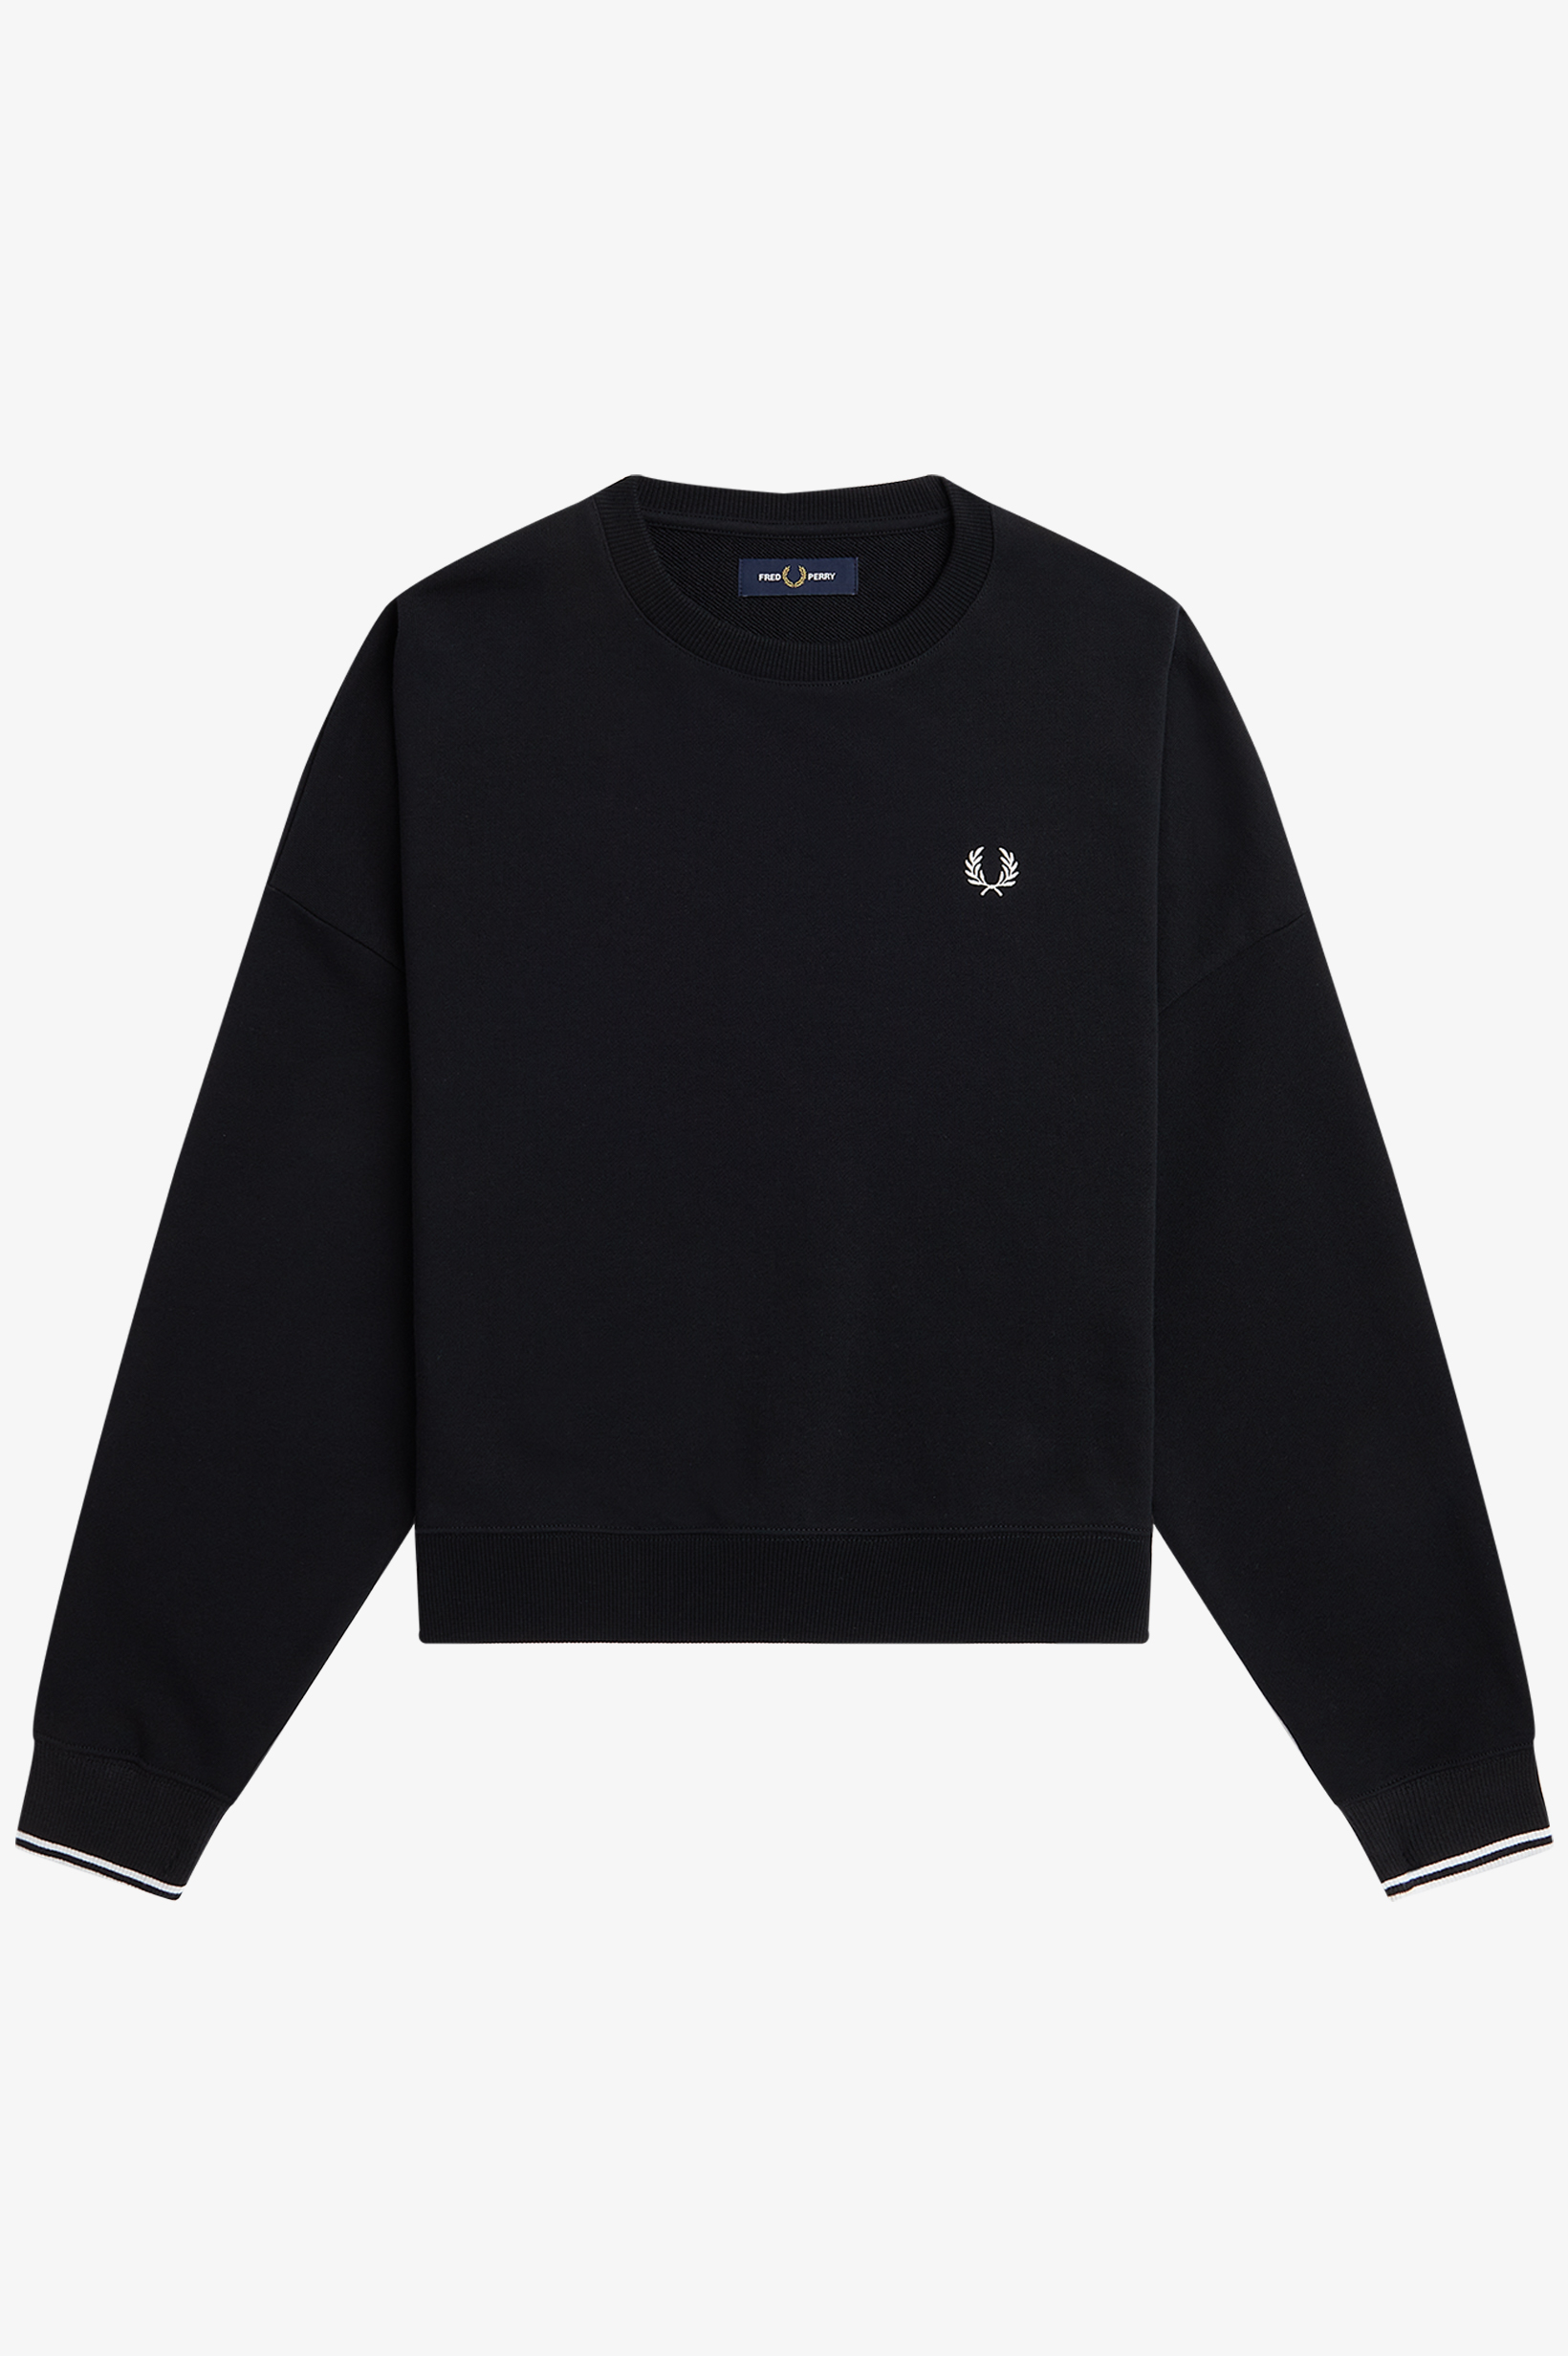 Fred Perry - TIPPED SWEATSHIRT - Black